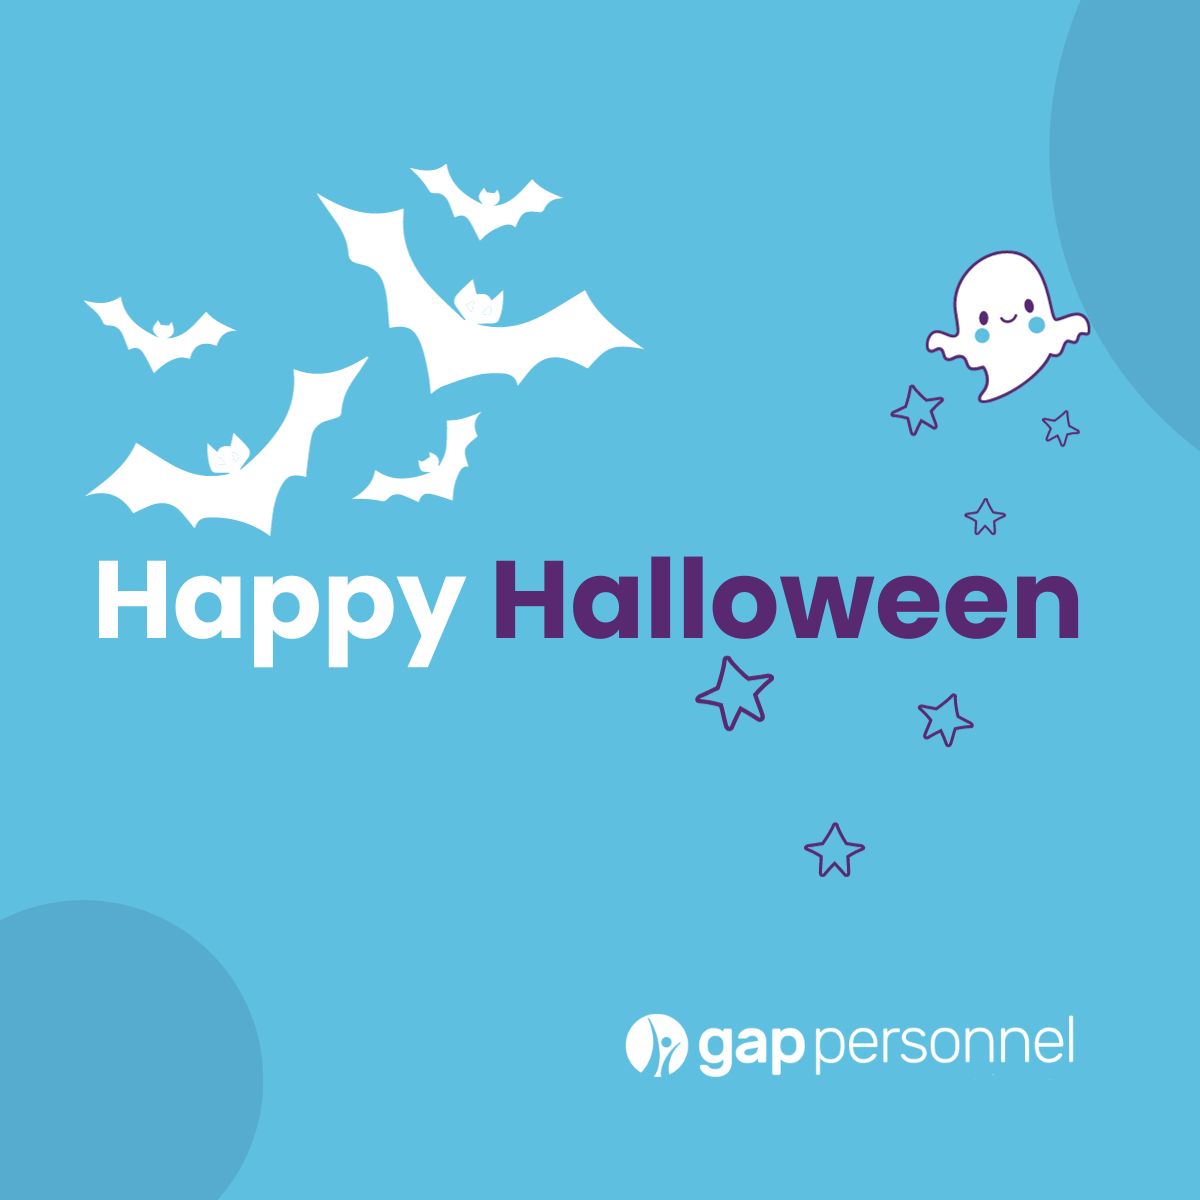 Boo! 👻 As it's Halloween, we thought we’d get into the spooky spirit and explore the frightening side of recruitment. Have you ever encountered the bone-chilling moment when a perfect candidate disappears into thin air?